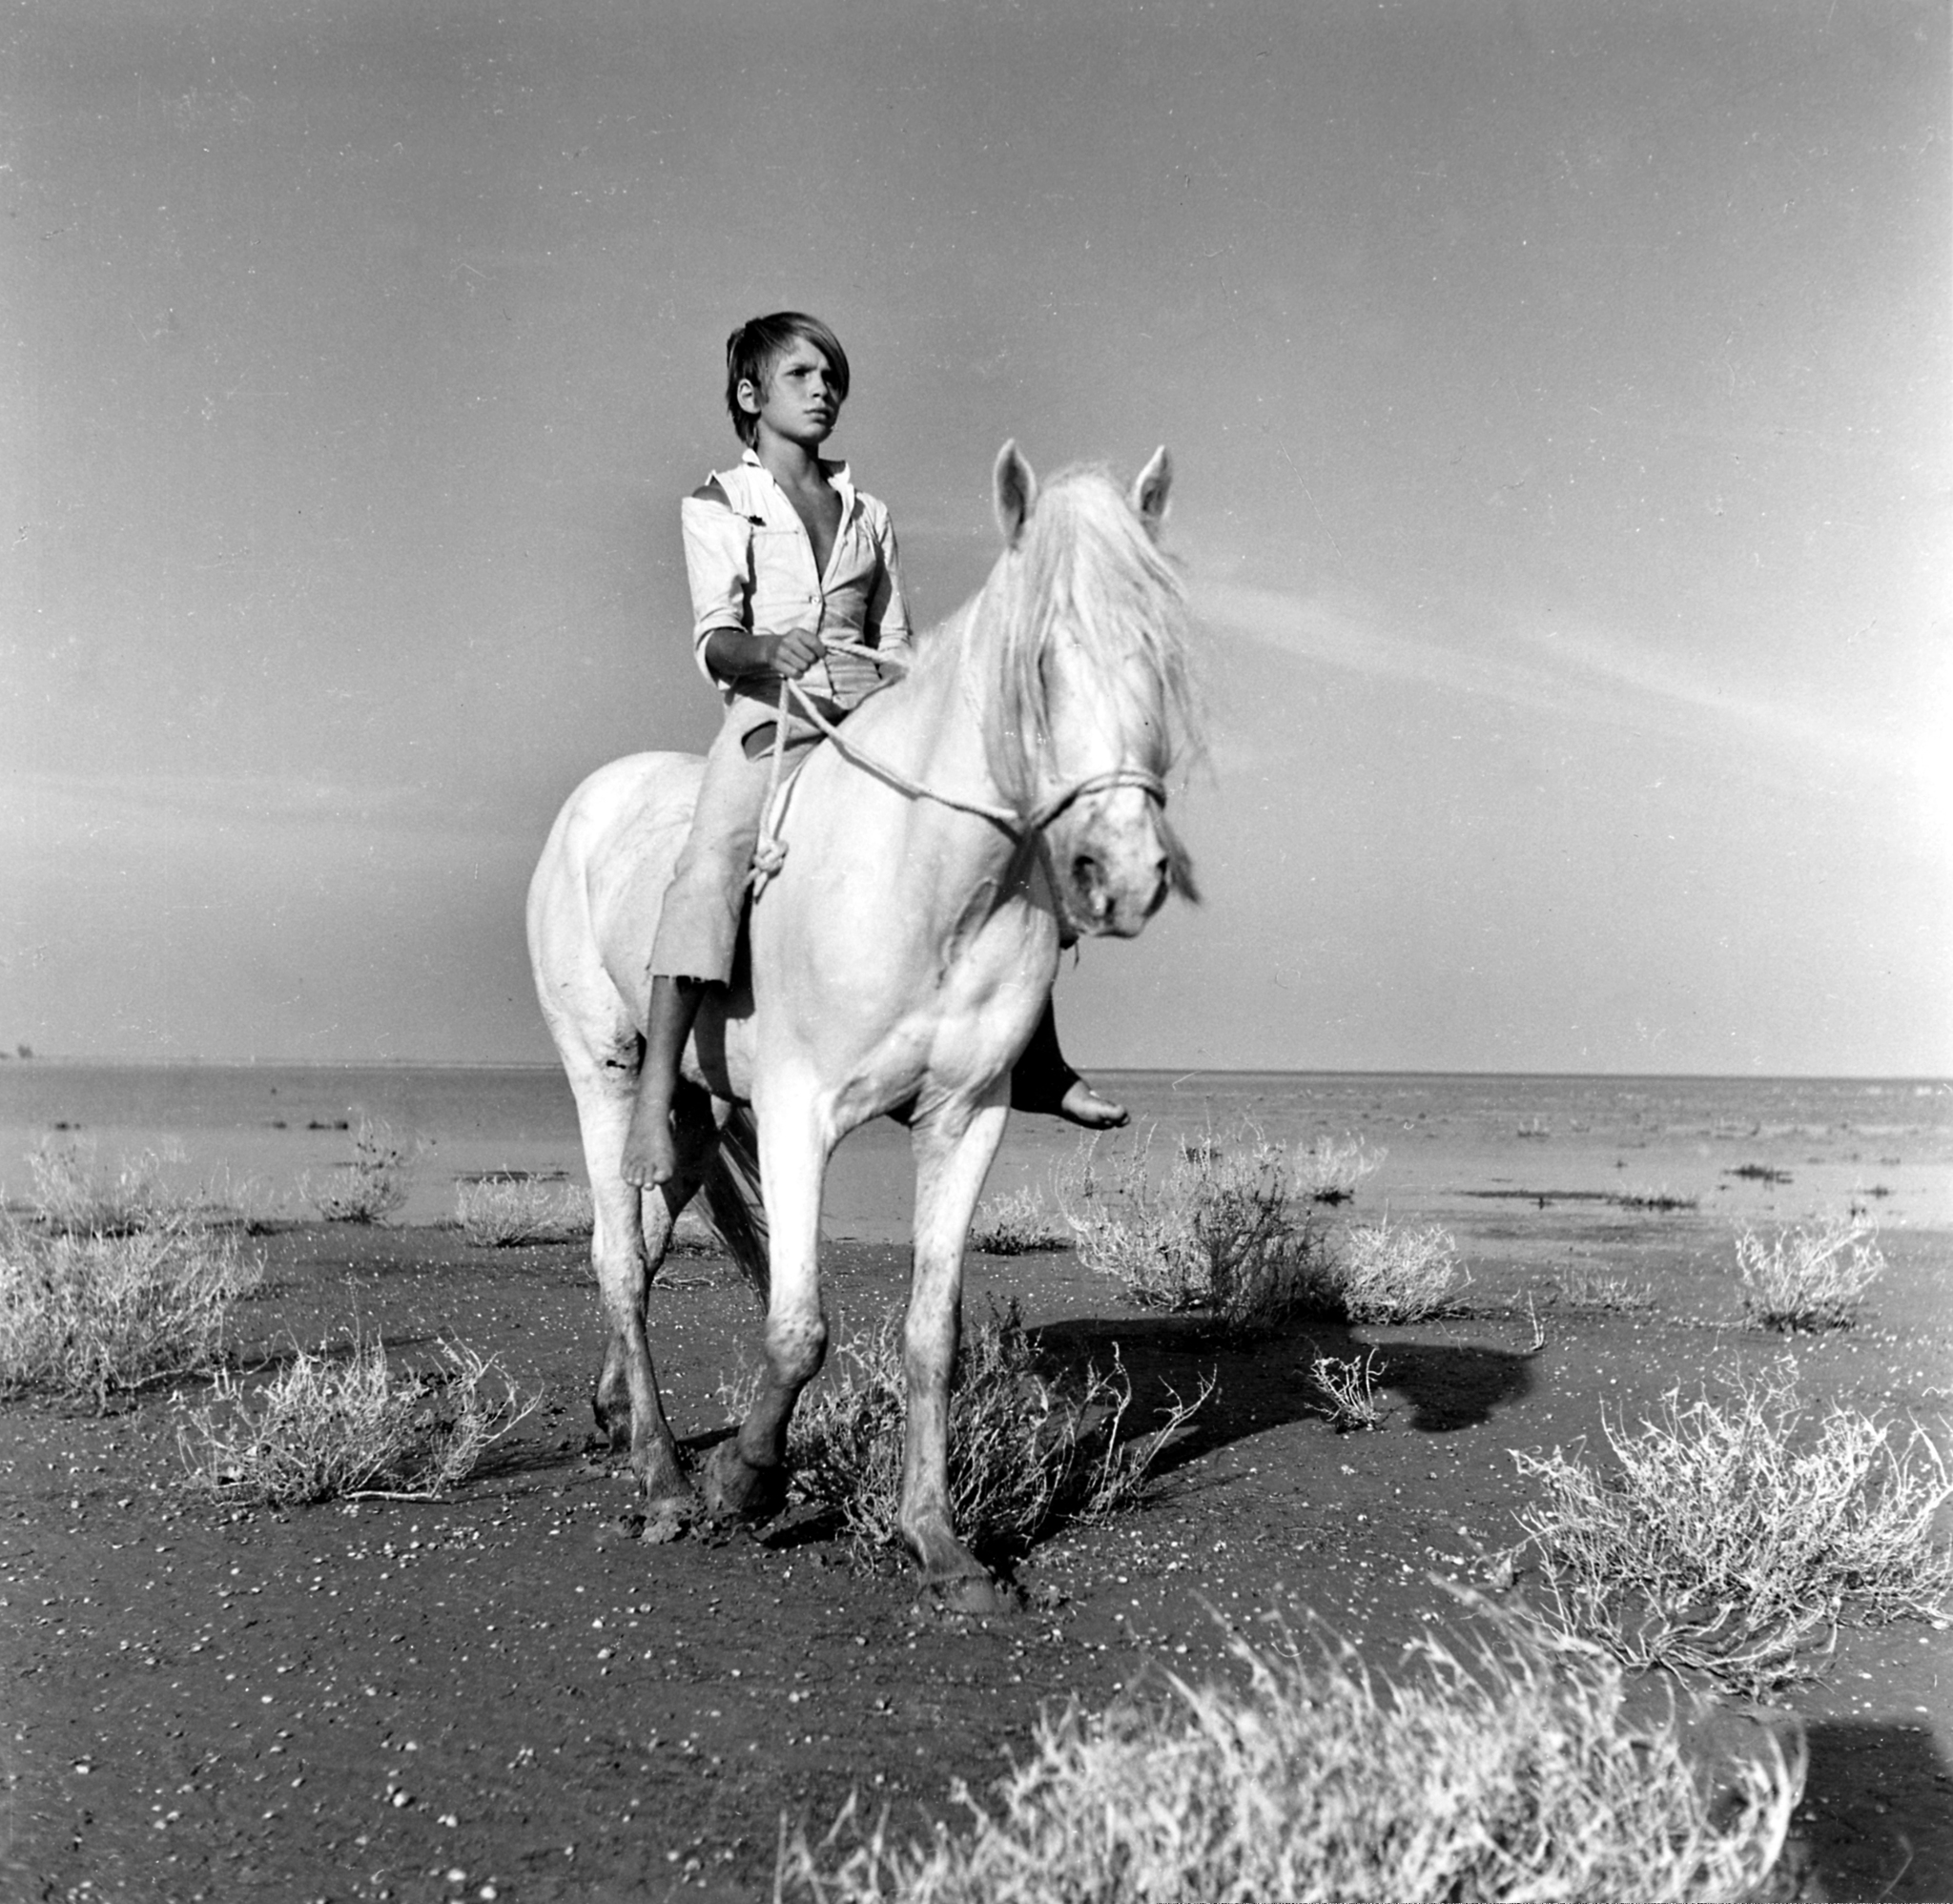 Still of Alain Emery in Crin blanc: Le cheval sauvage (1953)